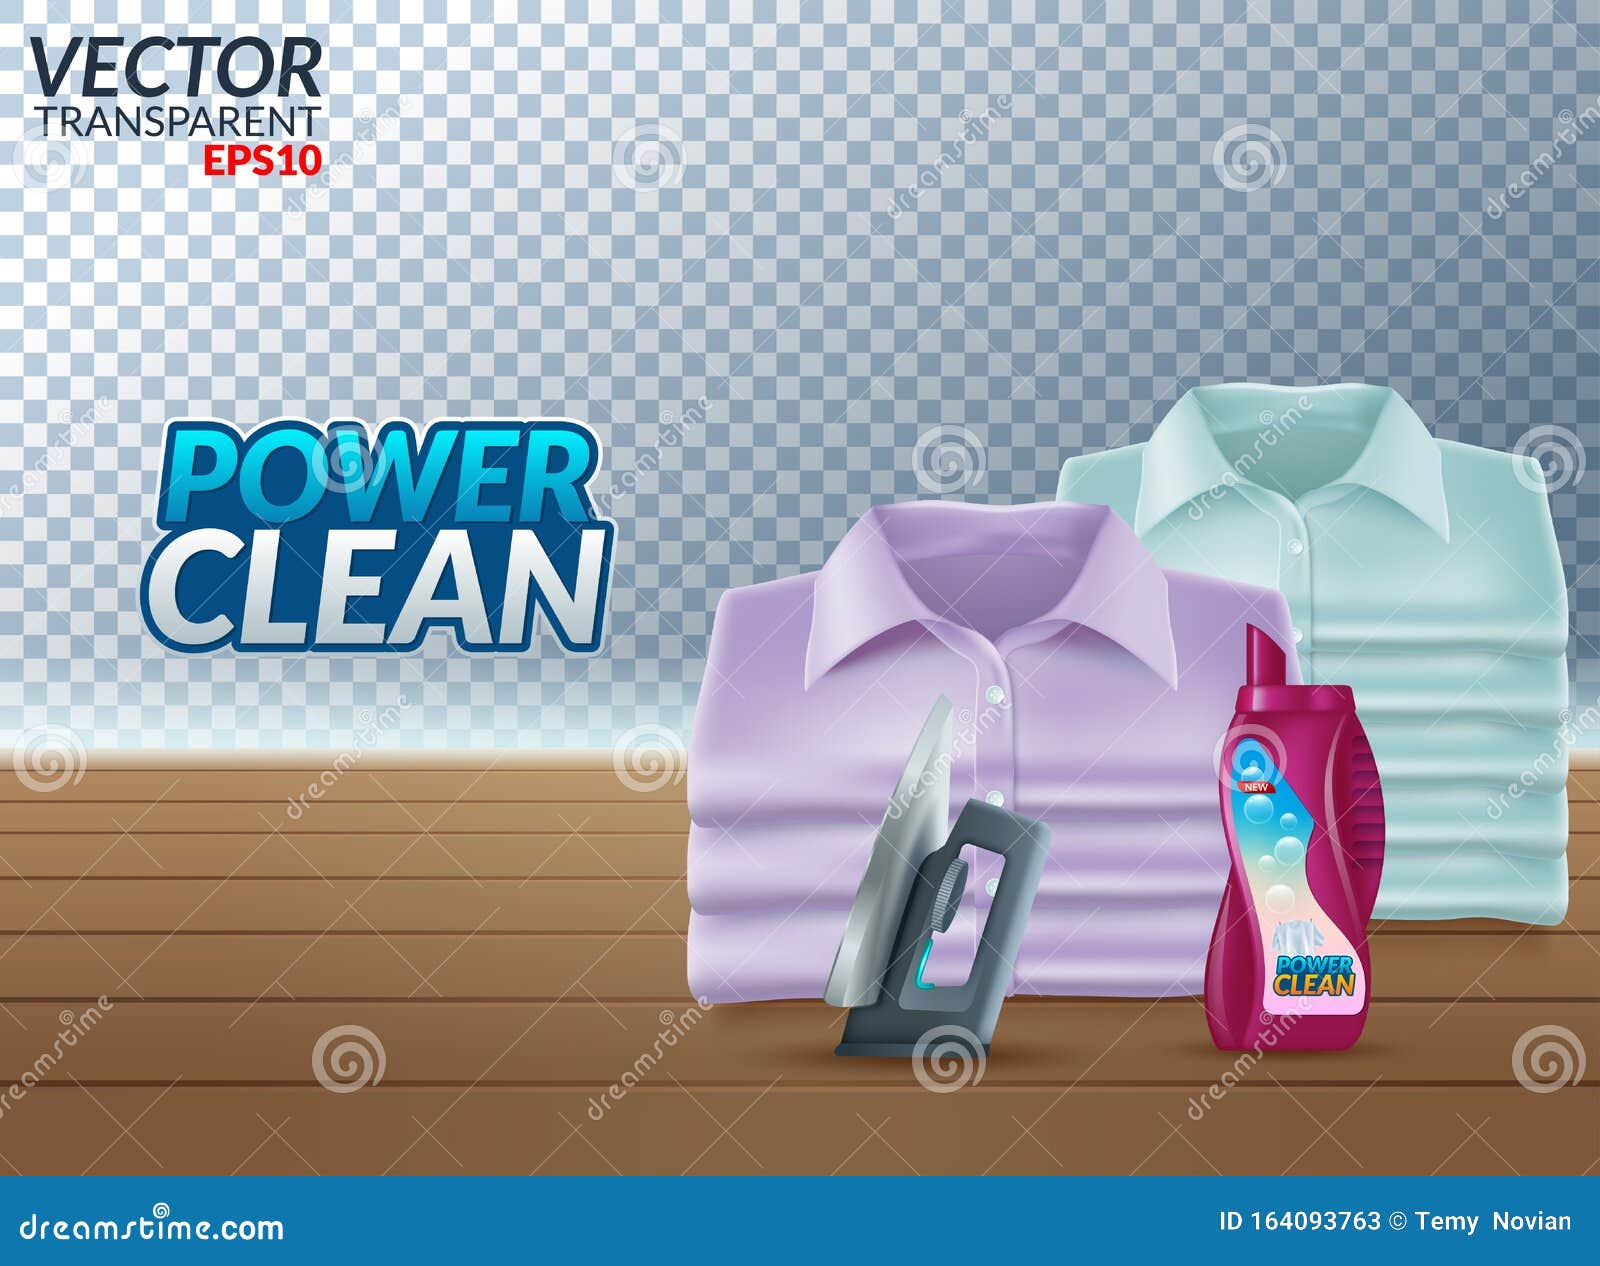 Powder Laundry Detergent Advertising Poster. Vector Realistic